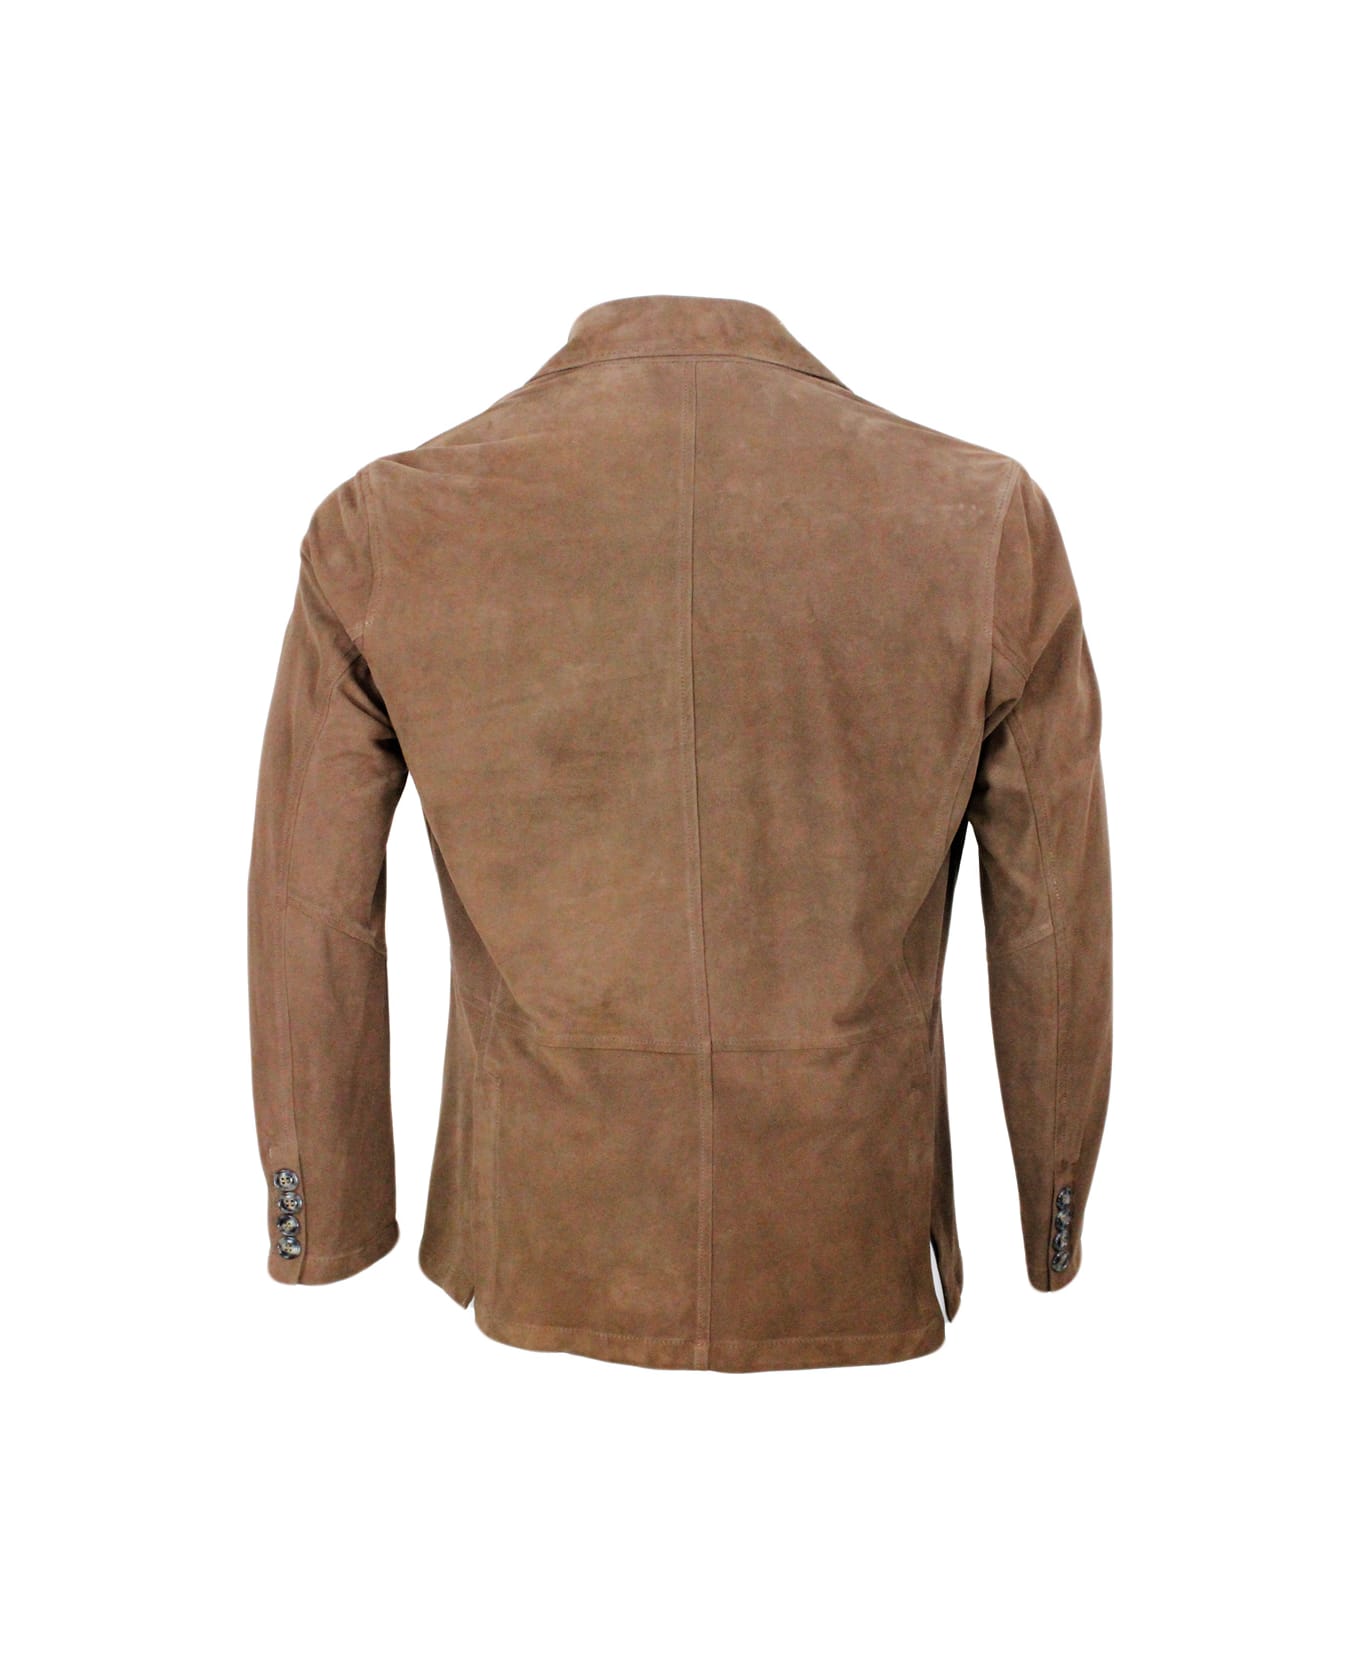 Barba Napoli Jacket In Soft And Fine Single-breasted Suede With 3-button Placket And Patch Pockets - Brown